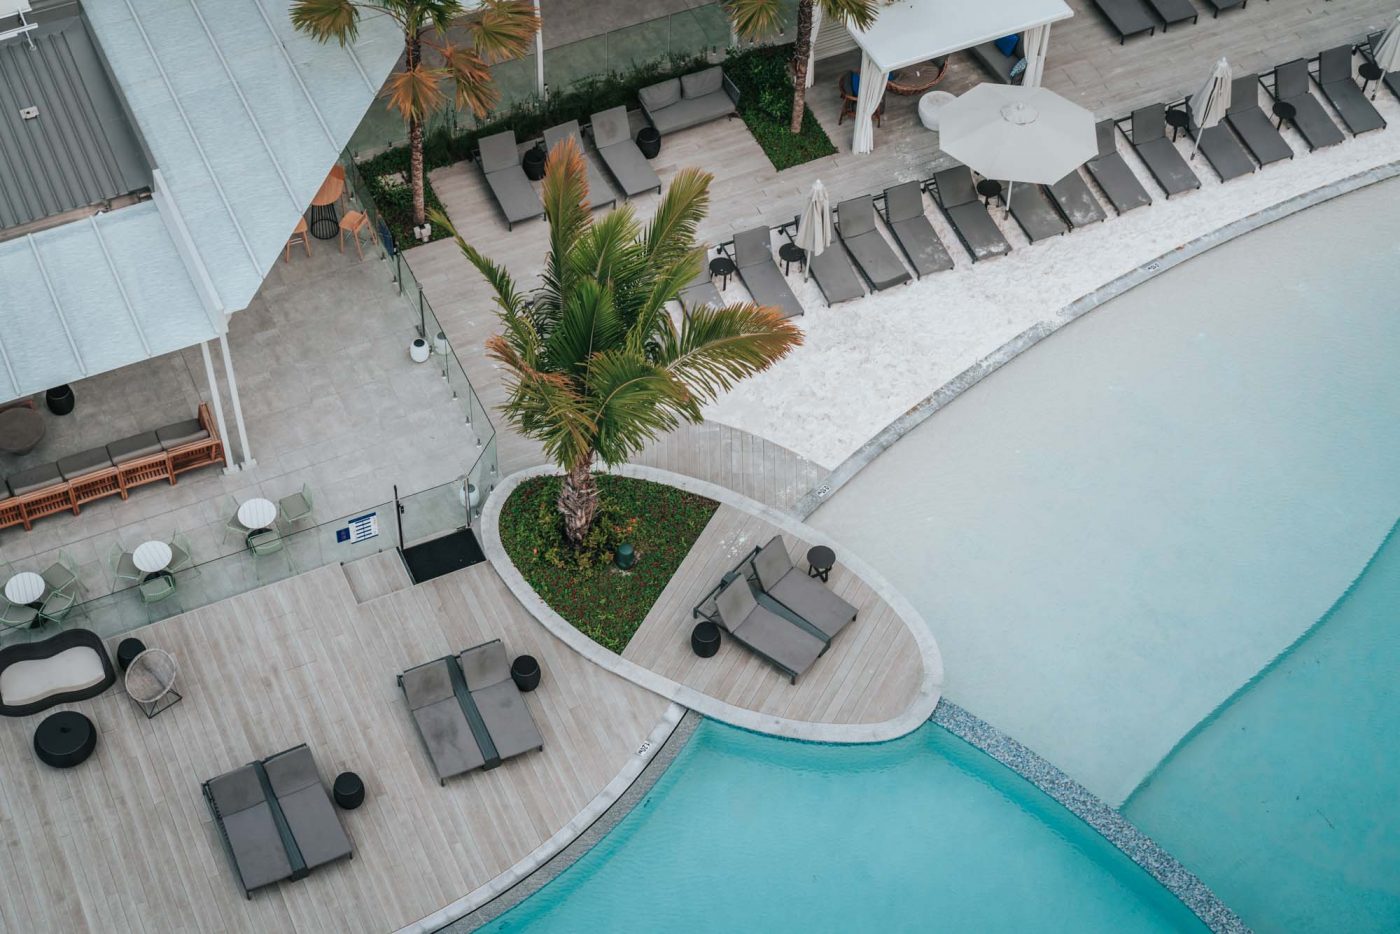 Overlooking the pool at riley hotel cairns